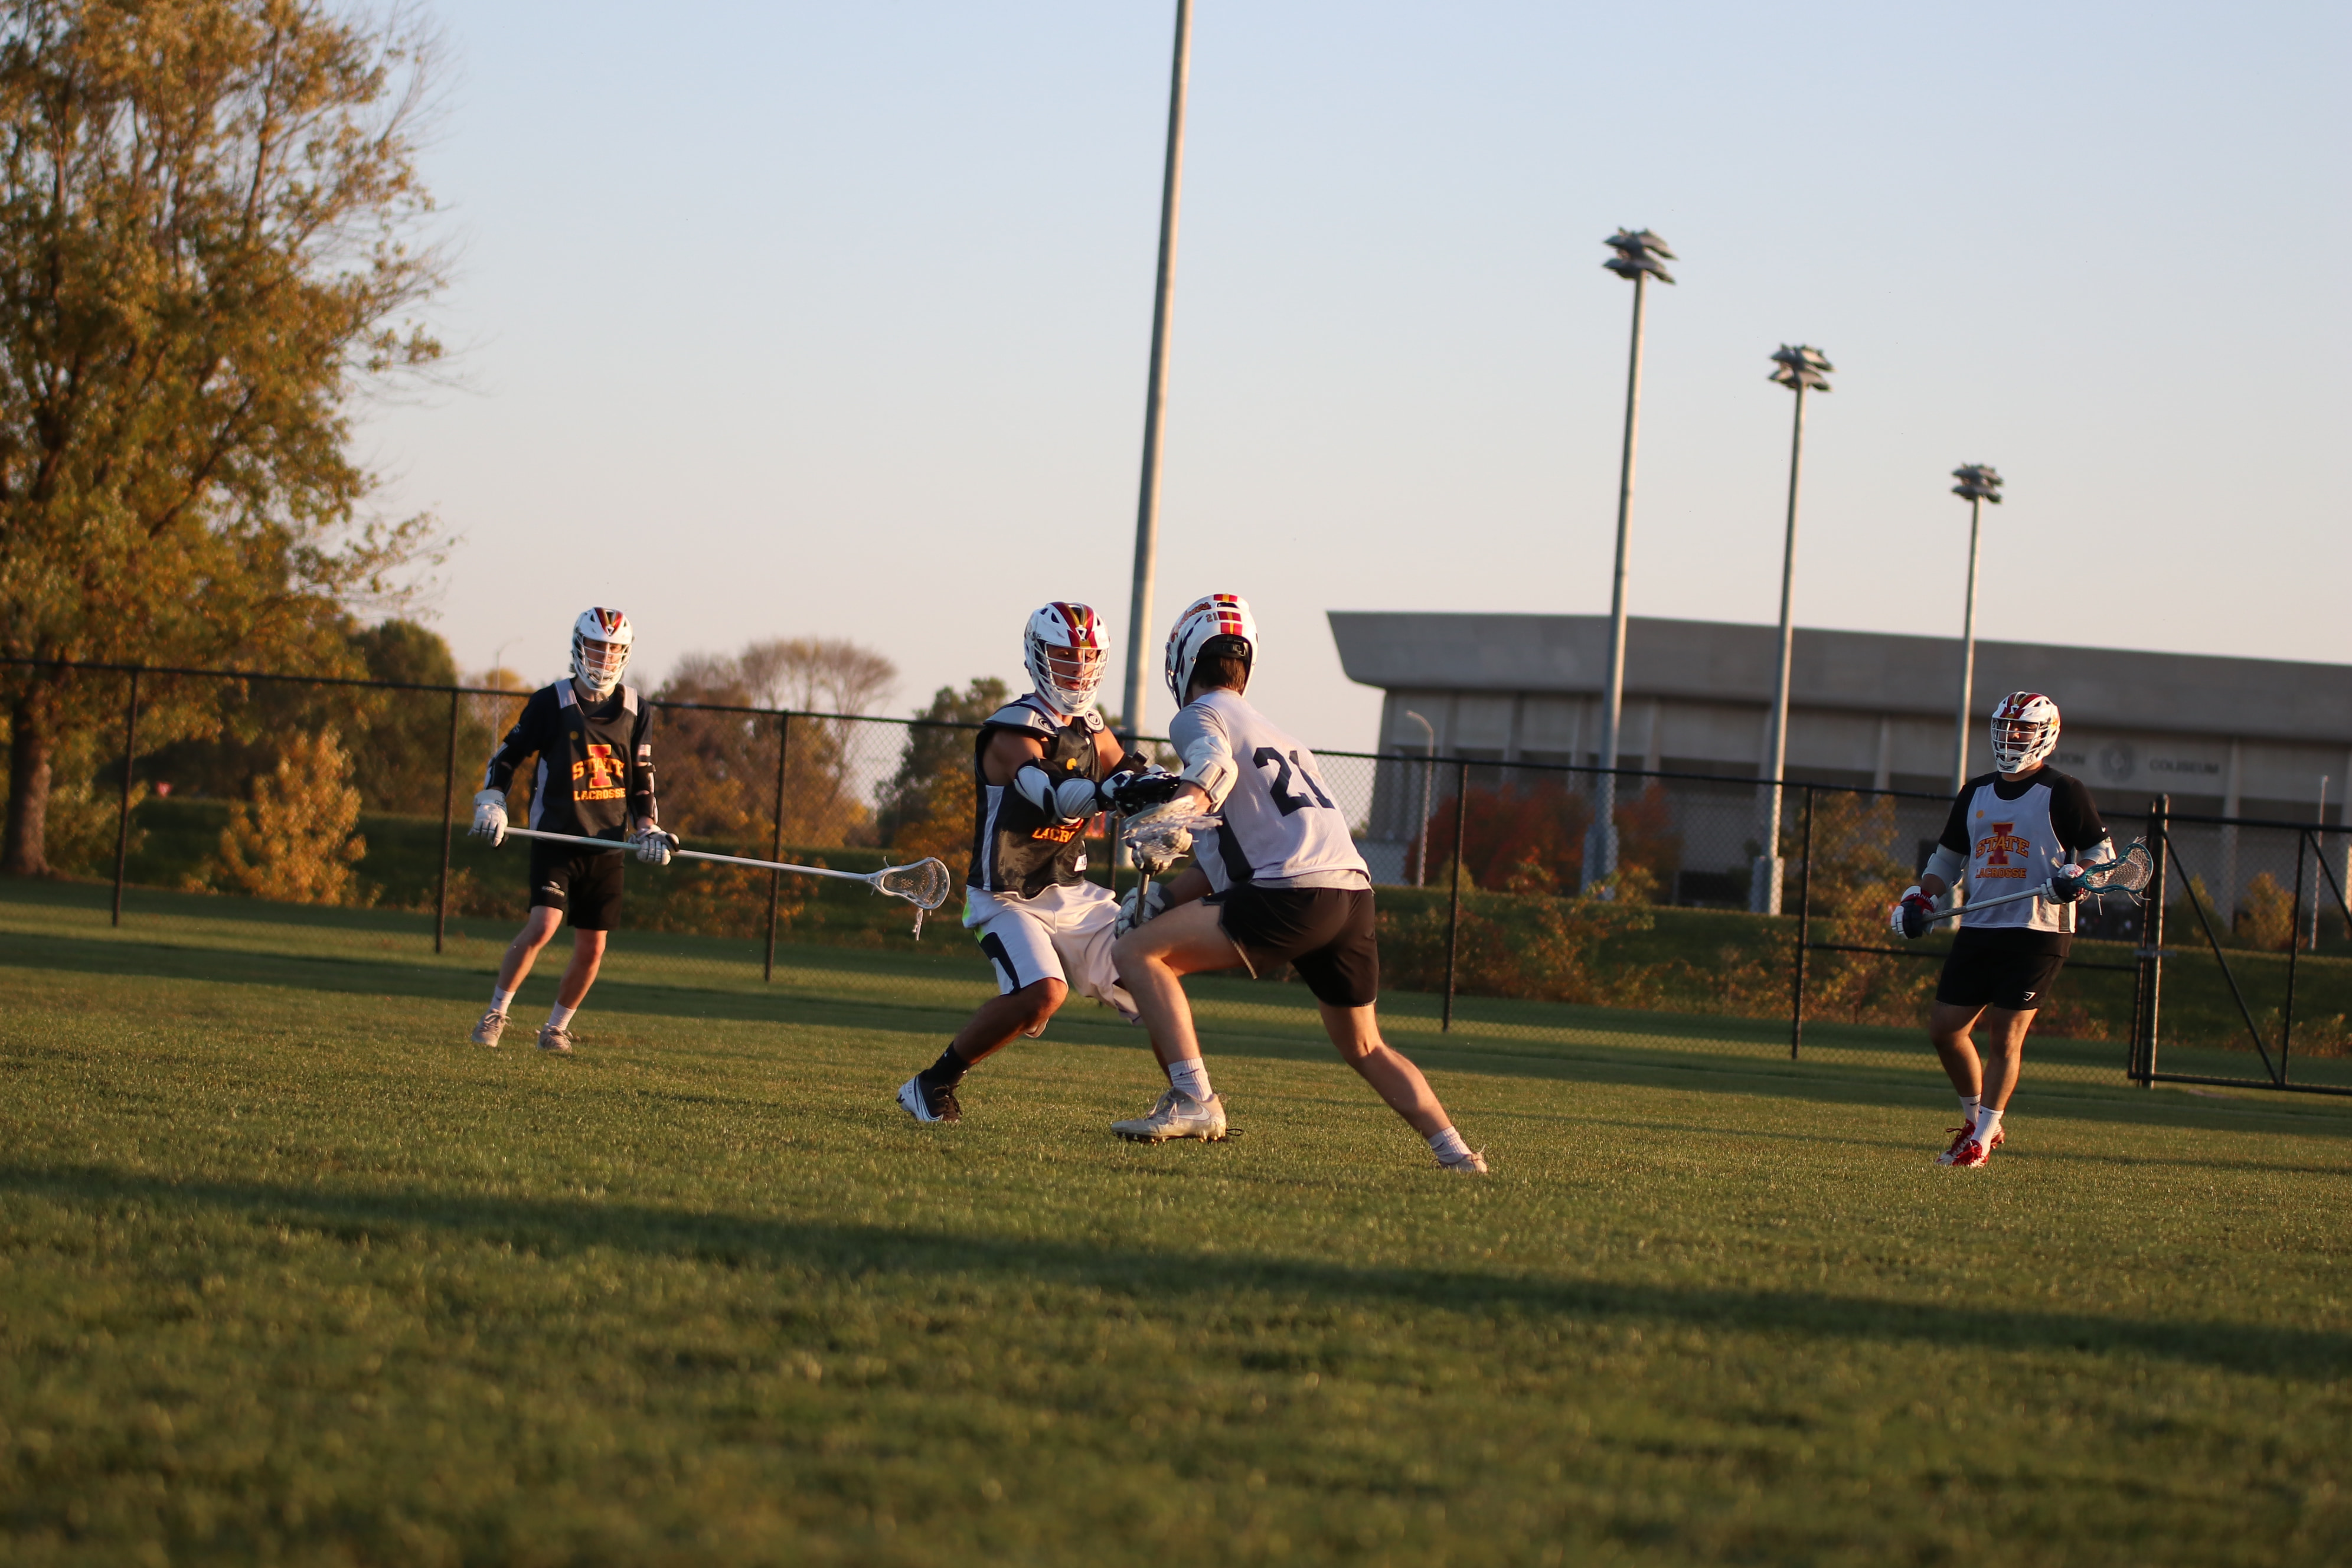 a photo of a group of people playing lacrosse on the lied rec field